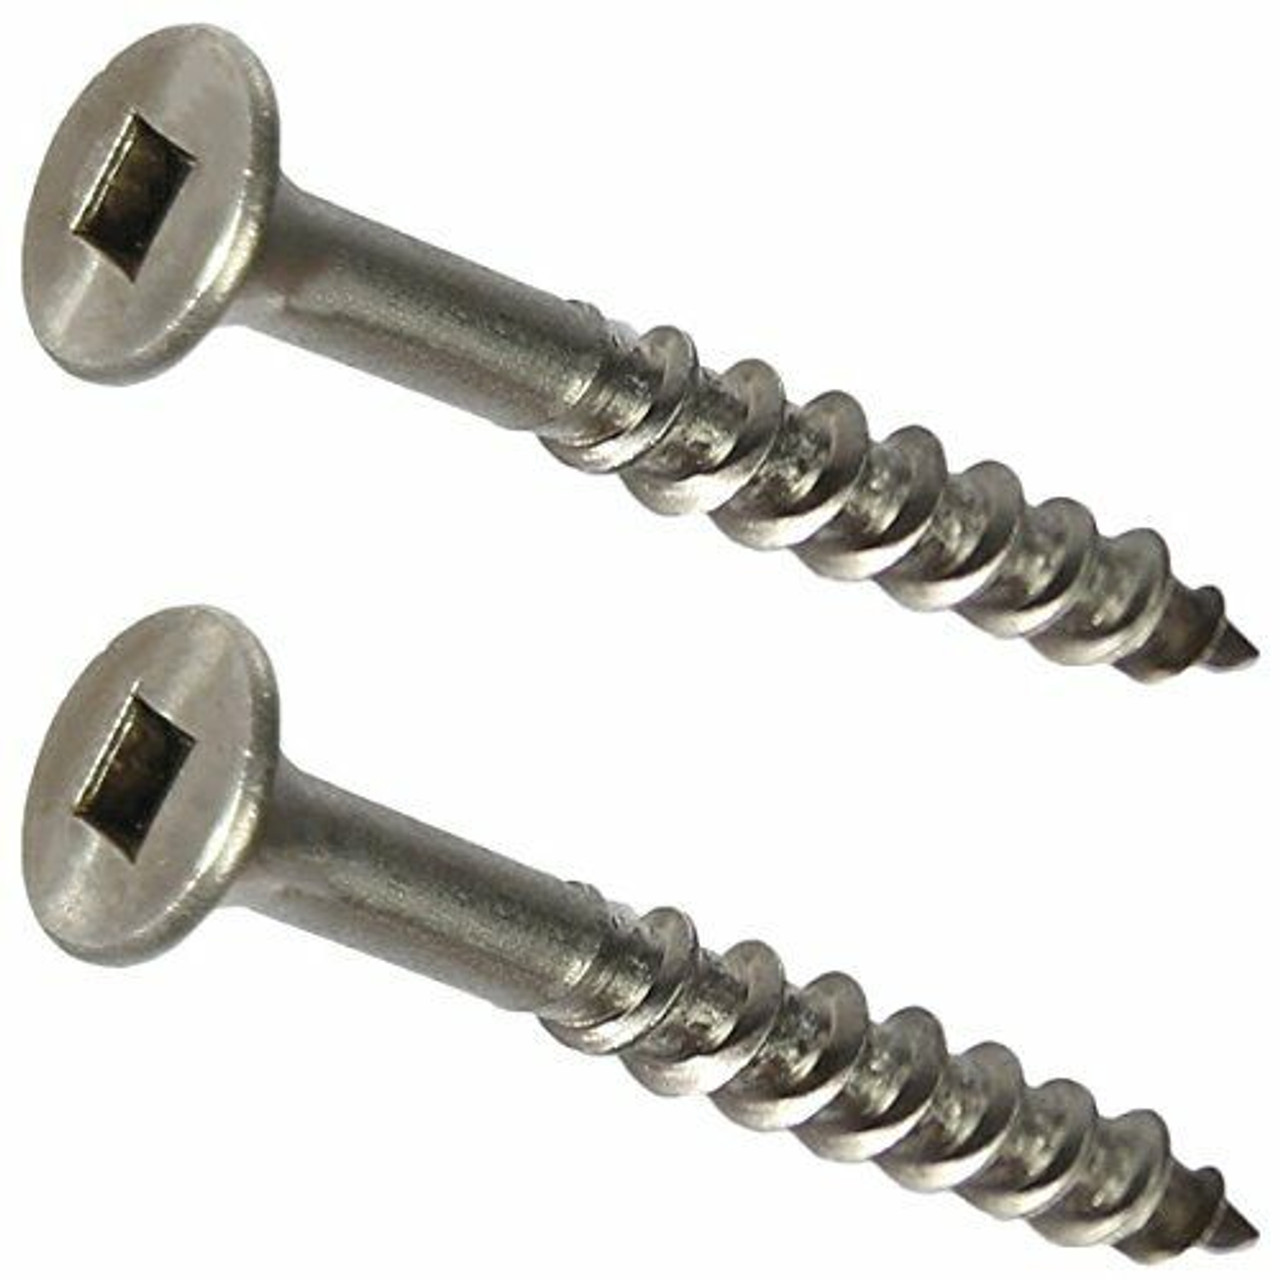 #10 x 1-1/2 in. Phillips Flat Head Stainless Steel Wood Screw (2-Pack)